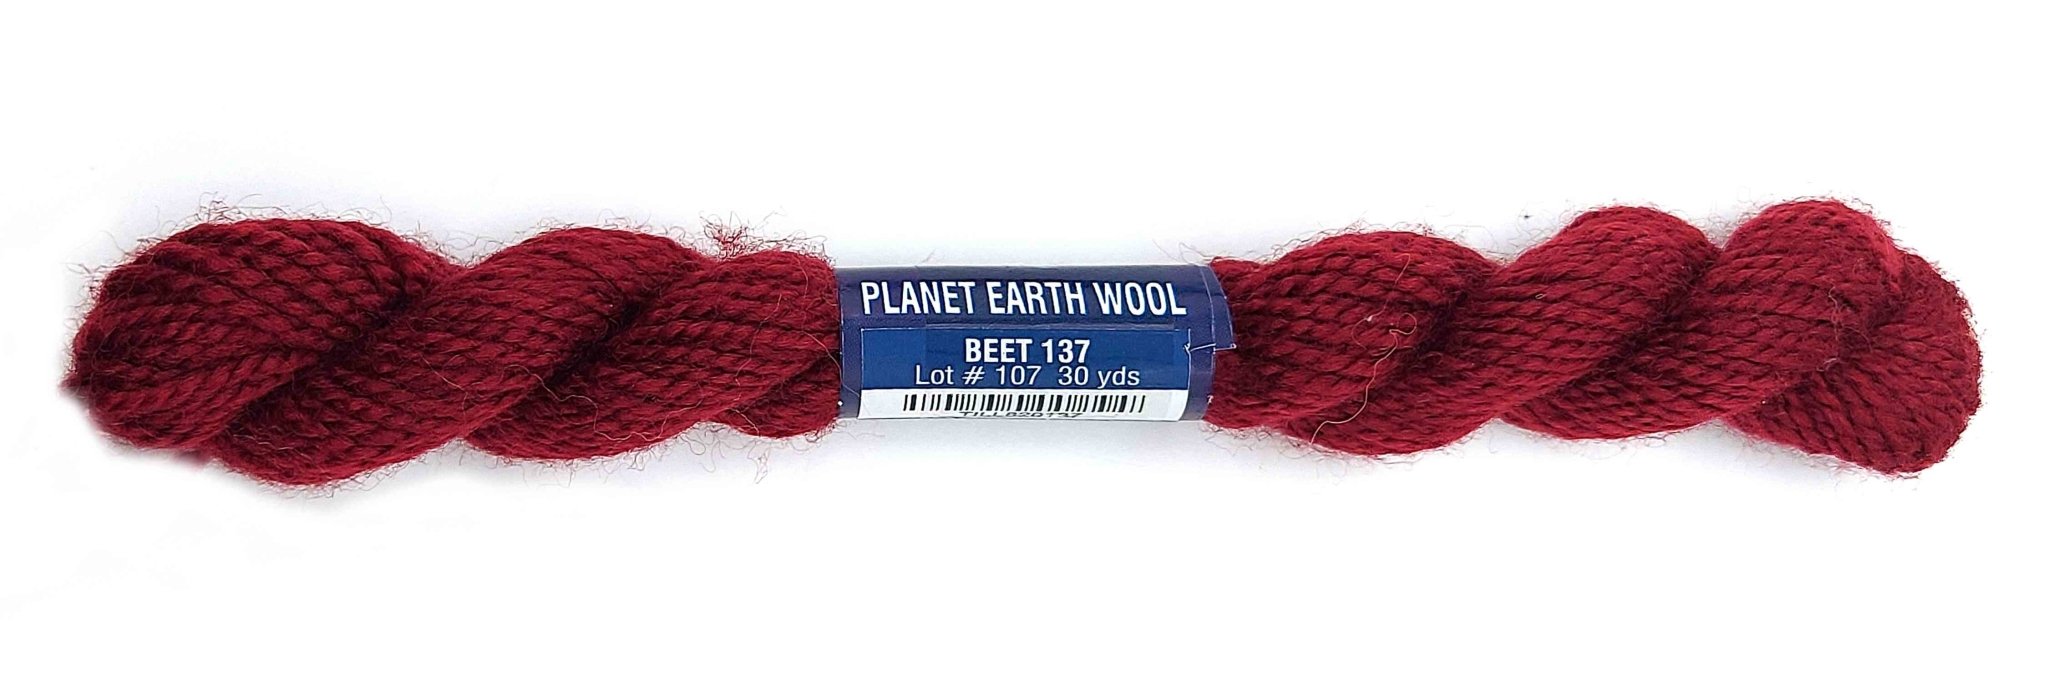 Planet Earth Wool 137 Beet - The Flying Needles